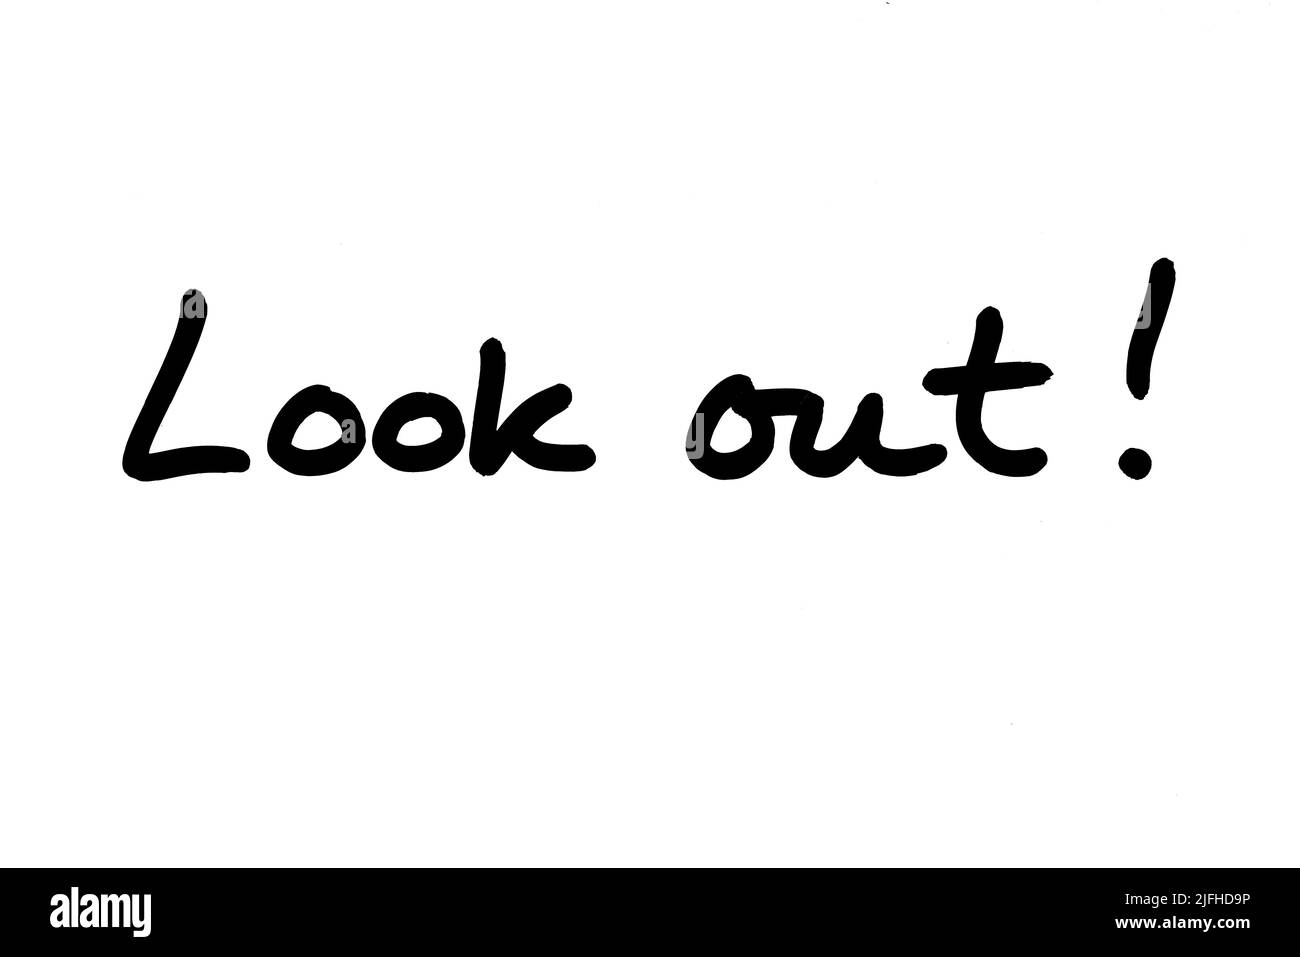 Look out! handwritten on a white background. Stock Photo